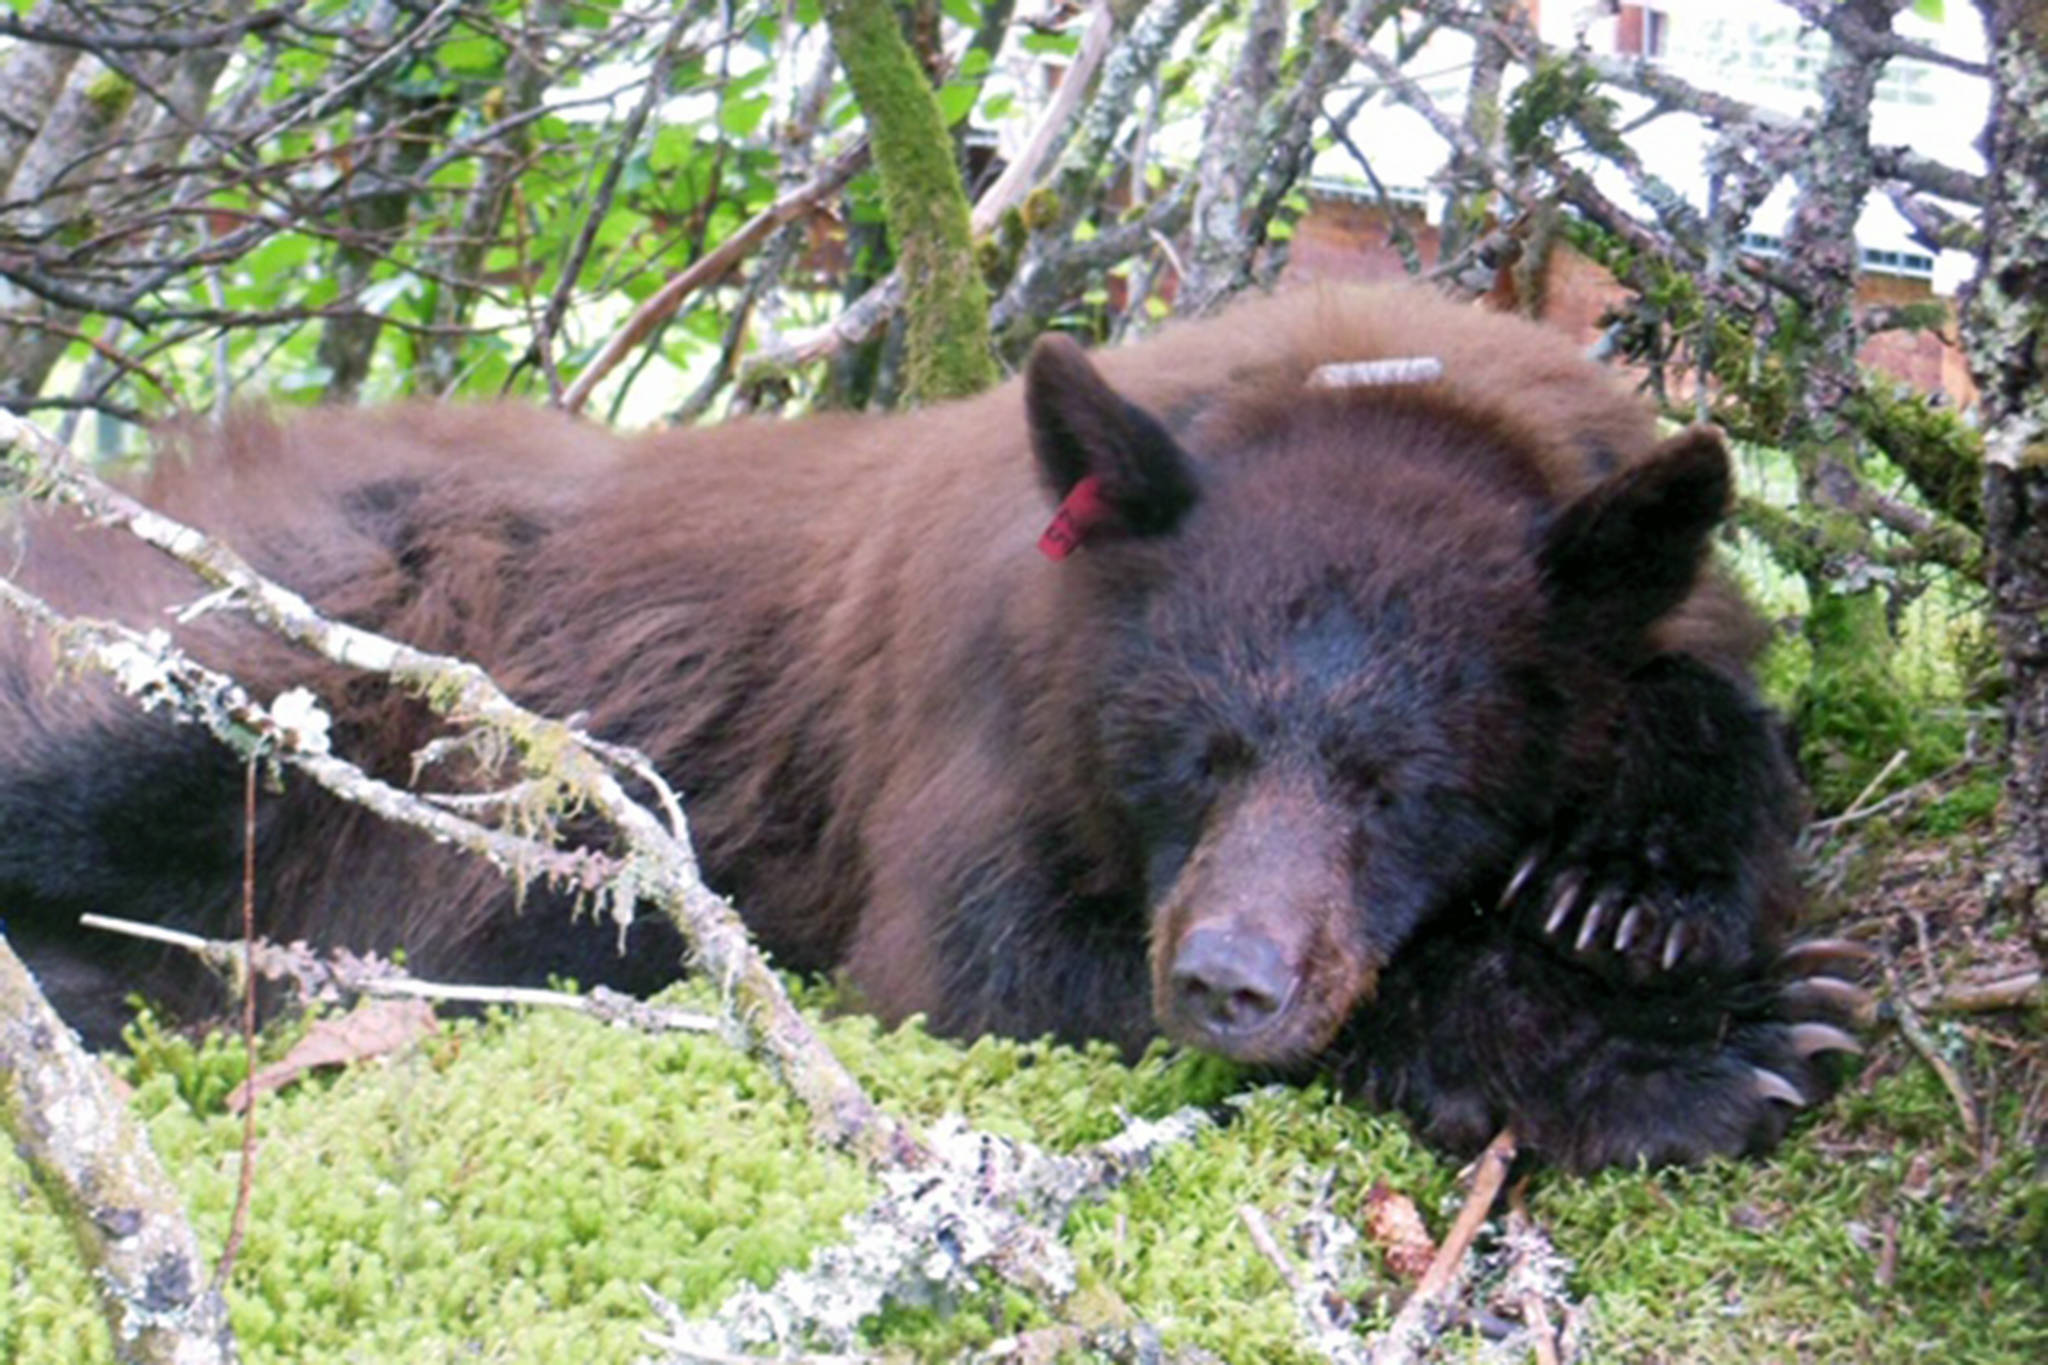 Nicky the bear sleeps near Mendenhall Glacier Visitor Center. The famous bear with a nicked ear was the subject Friday of a public lecture at the center. (Courtesy photo | Laurie Craig)